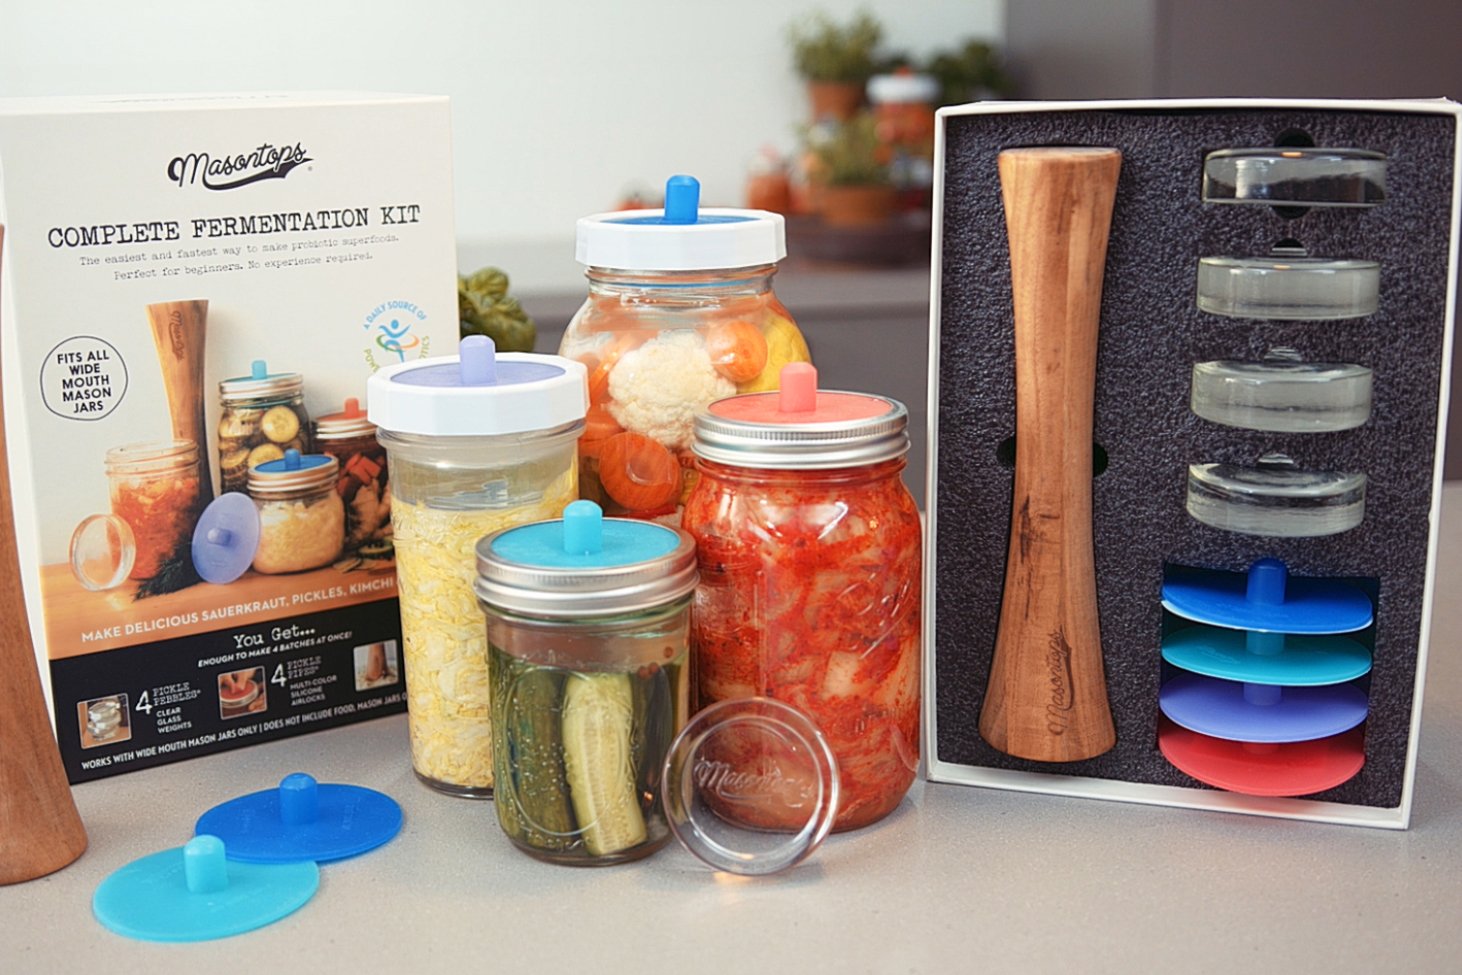 Masontops - Complete Fermentation Kit All Things Being Eco Chilliwack Zero Waste Specialty Store Since 2008